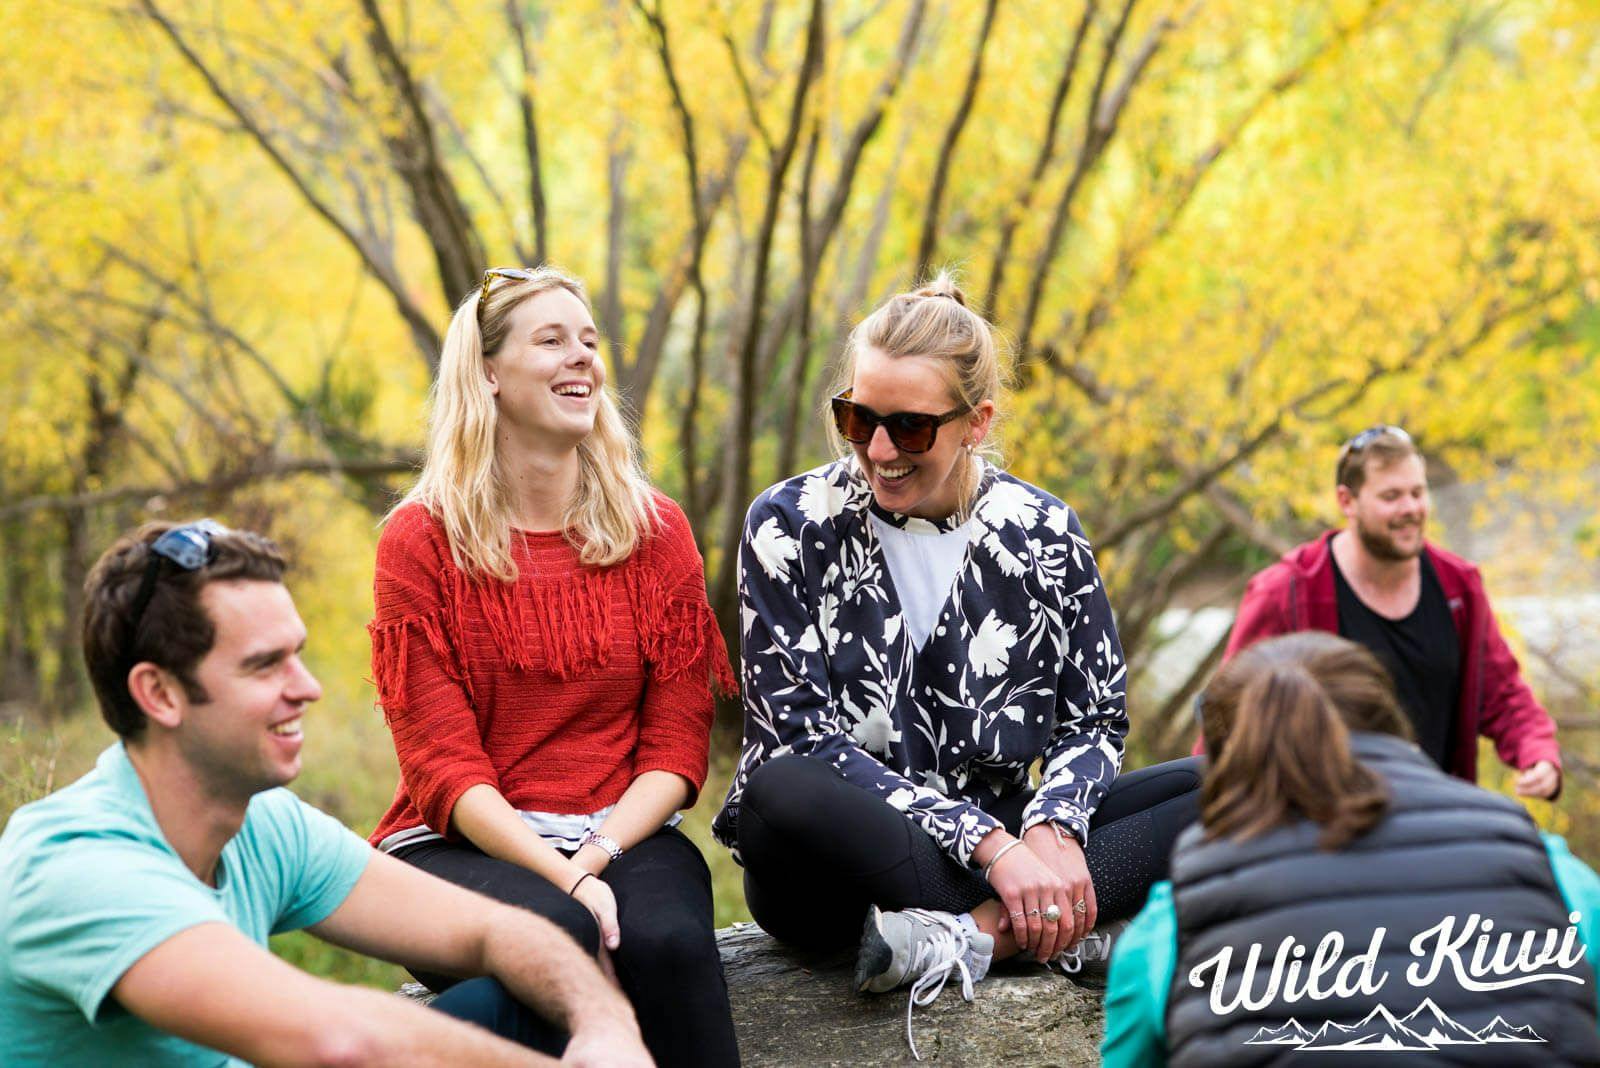 Make friends as you travel New Zealand - Find people you'll want to stay in touch with forever